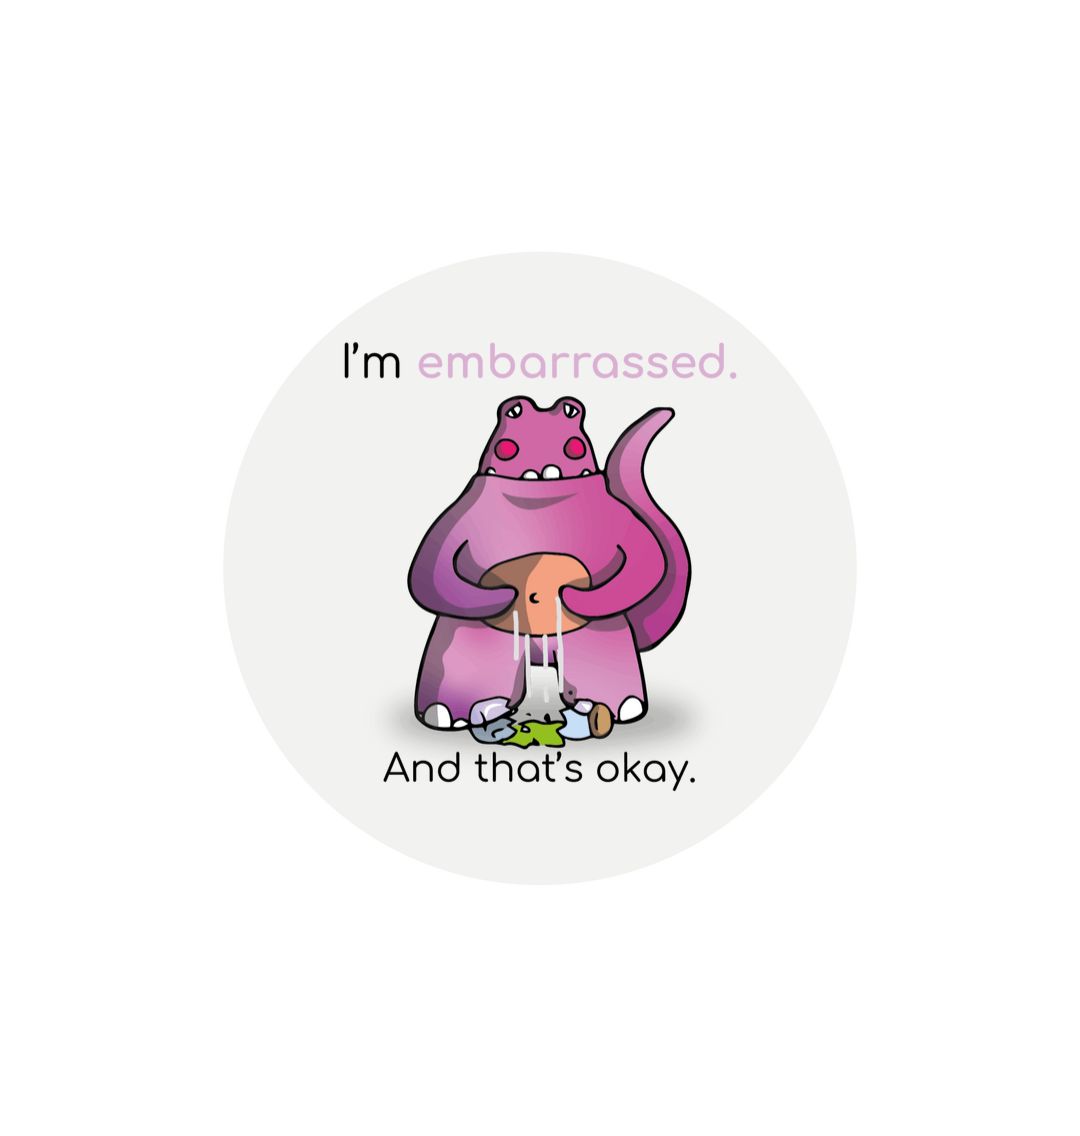 White \"I'm embarrassed. And that's okay!\" Round Children's Emotions Sticker 60mm x 60mm